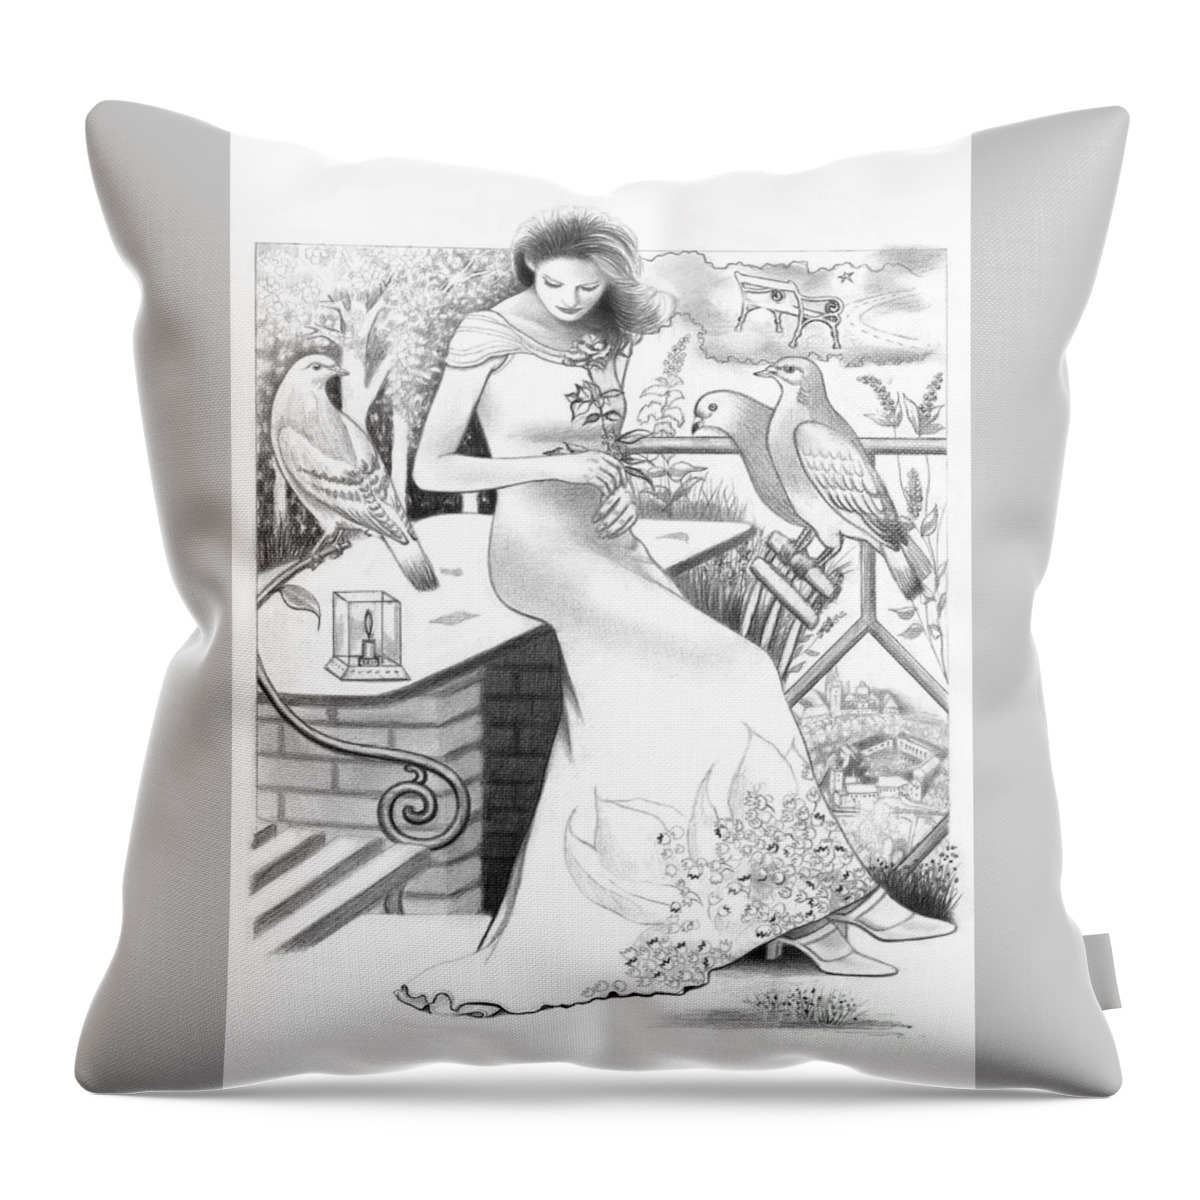 Girl Throw Pillow featuring the drawing I Miss You by Mira Ostojic